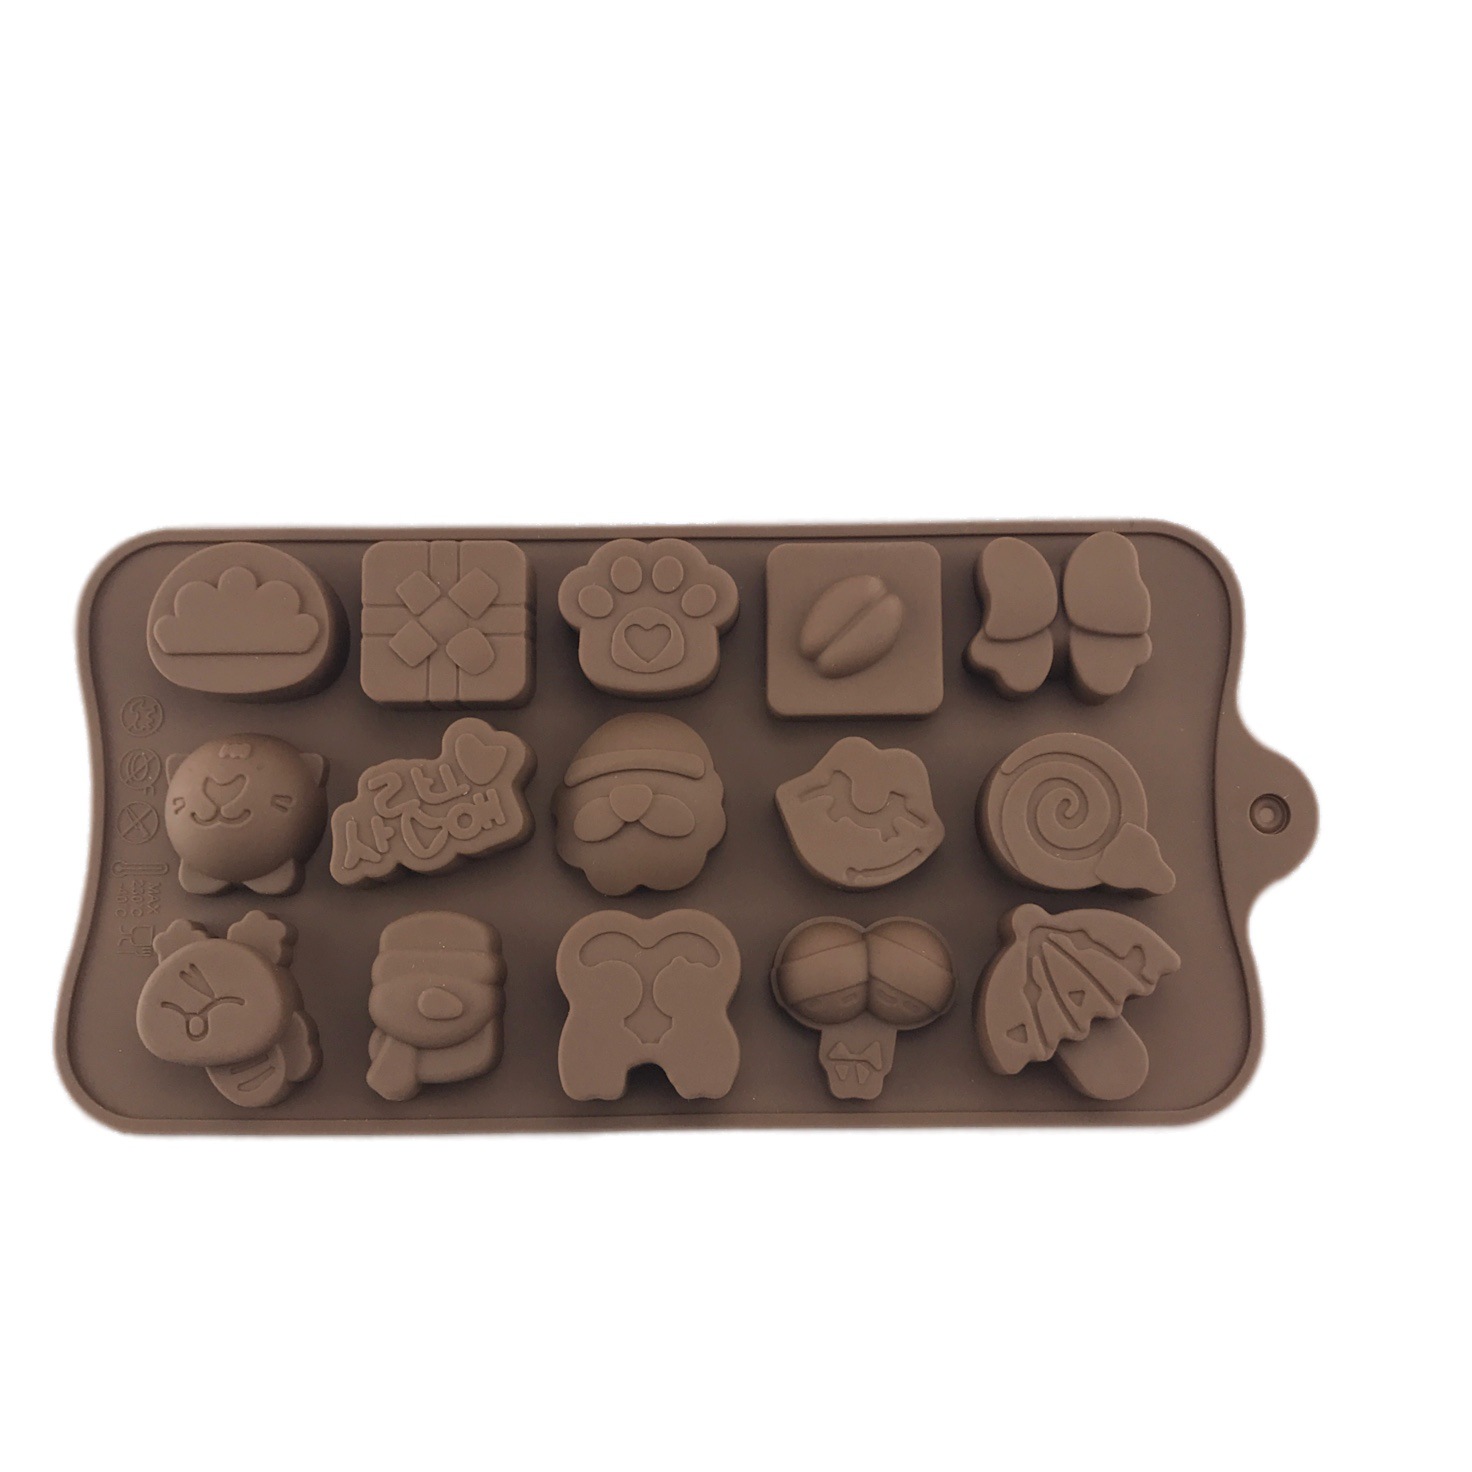 Diverse models Silicone Candy Chocolate Molds Flexible Baking Mold for Jello Shaping Hard or Gummy Candies